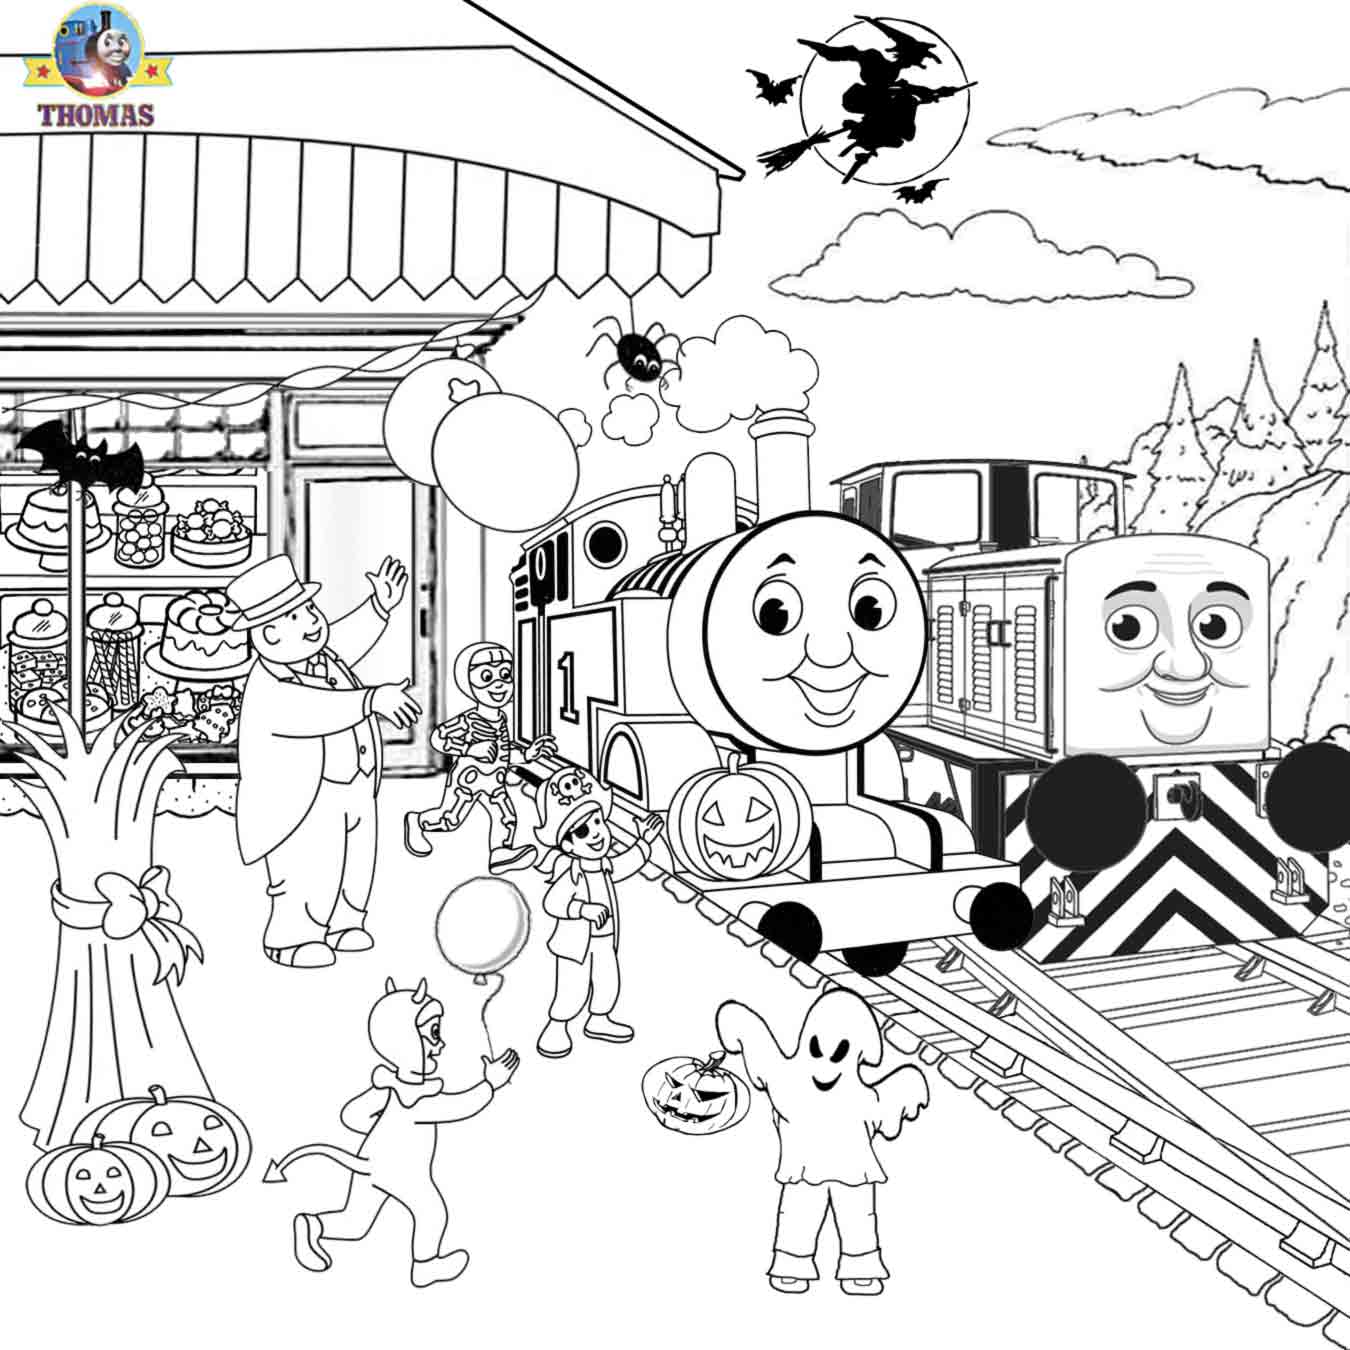 colouring pages thomas thomas the train coloring page free printable coloring pages pages thomas colouring 